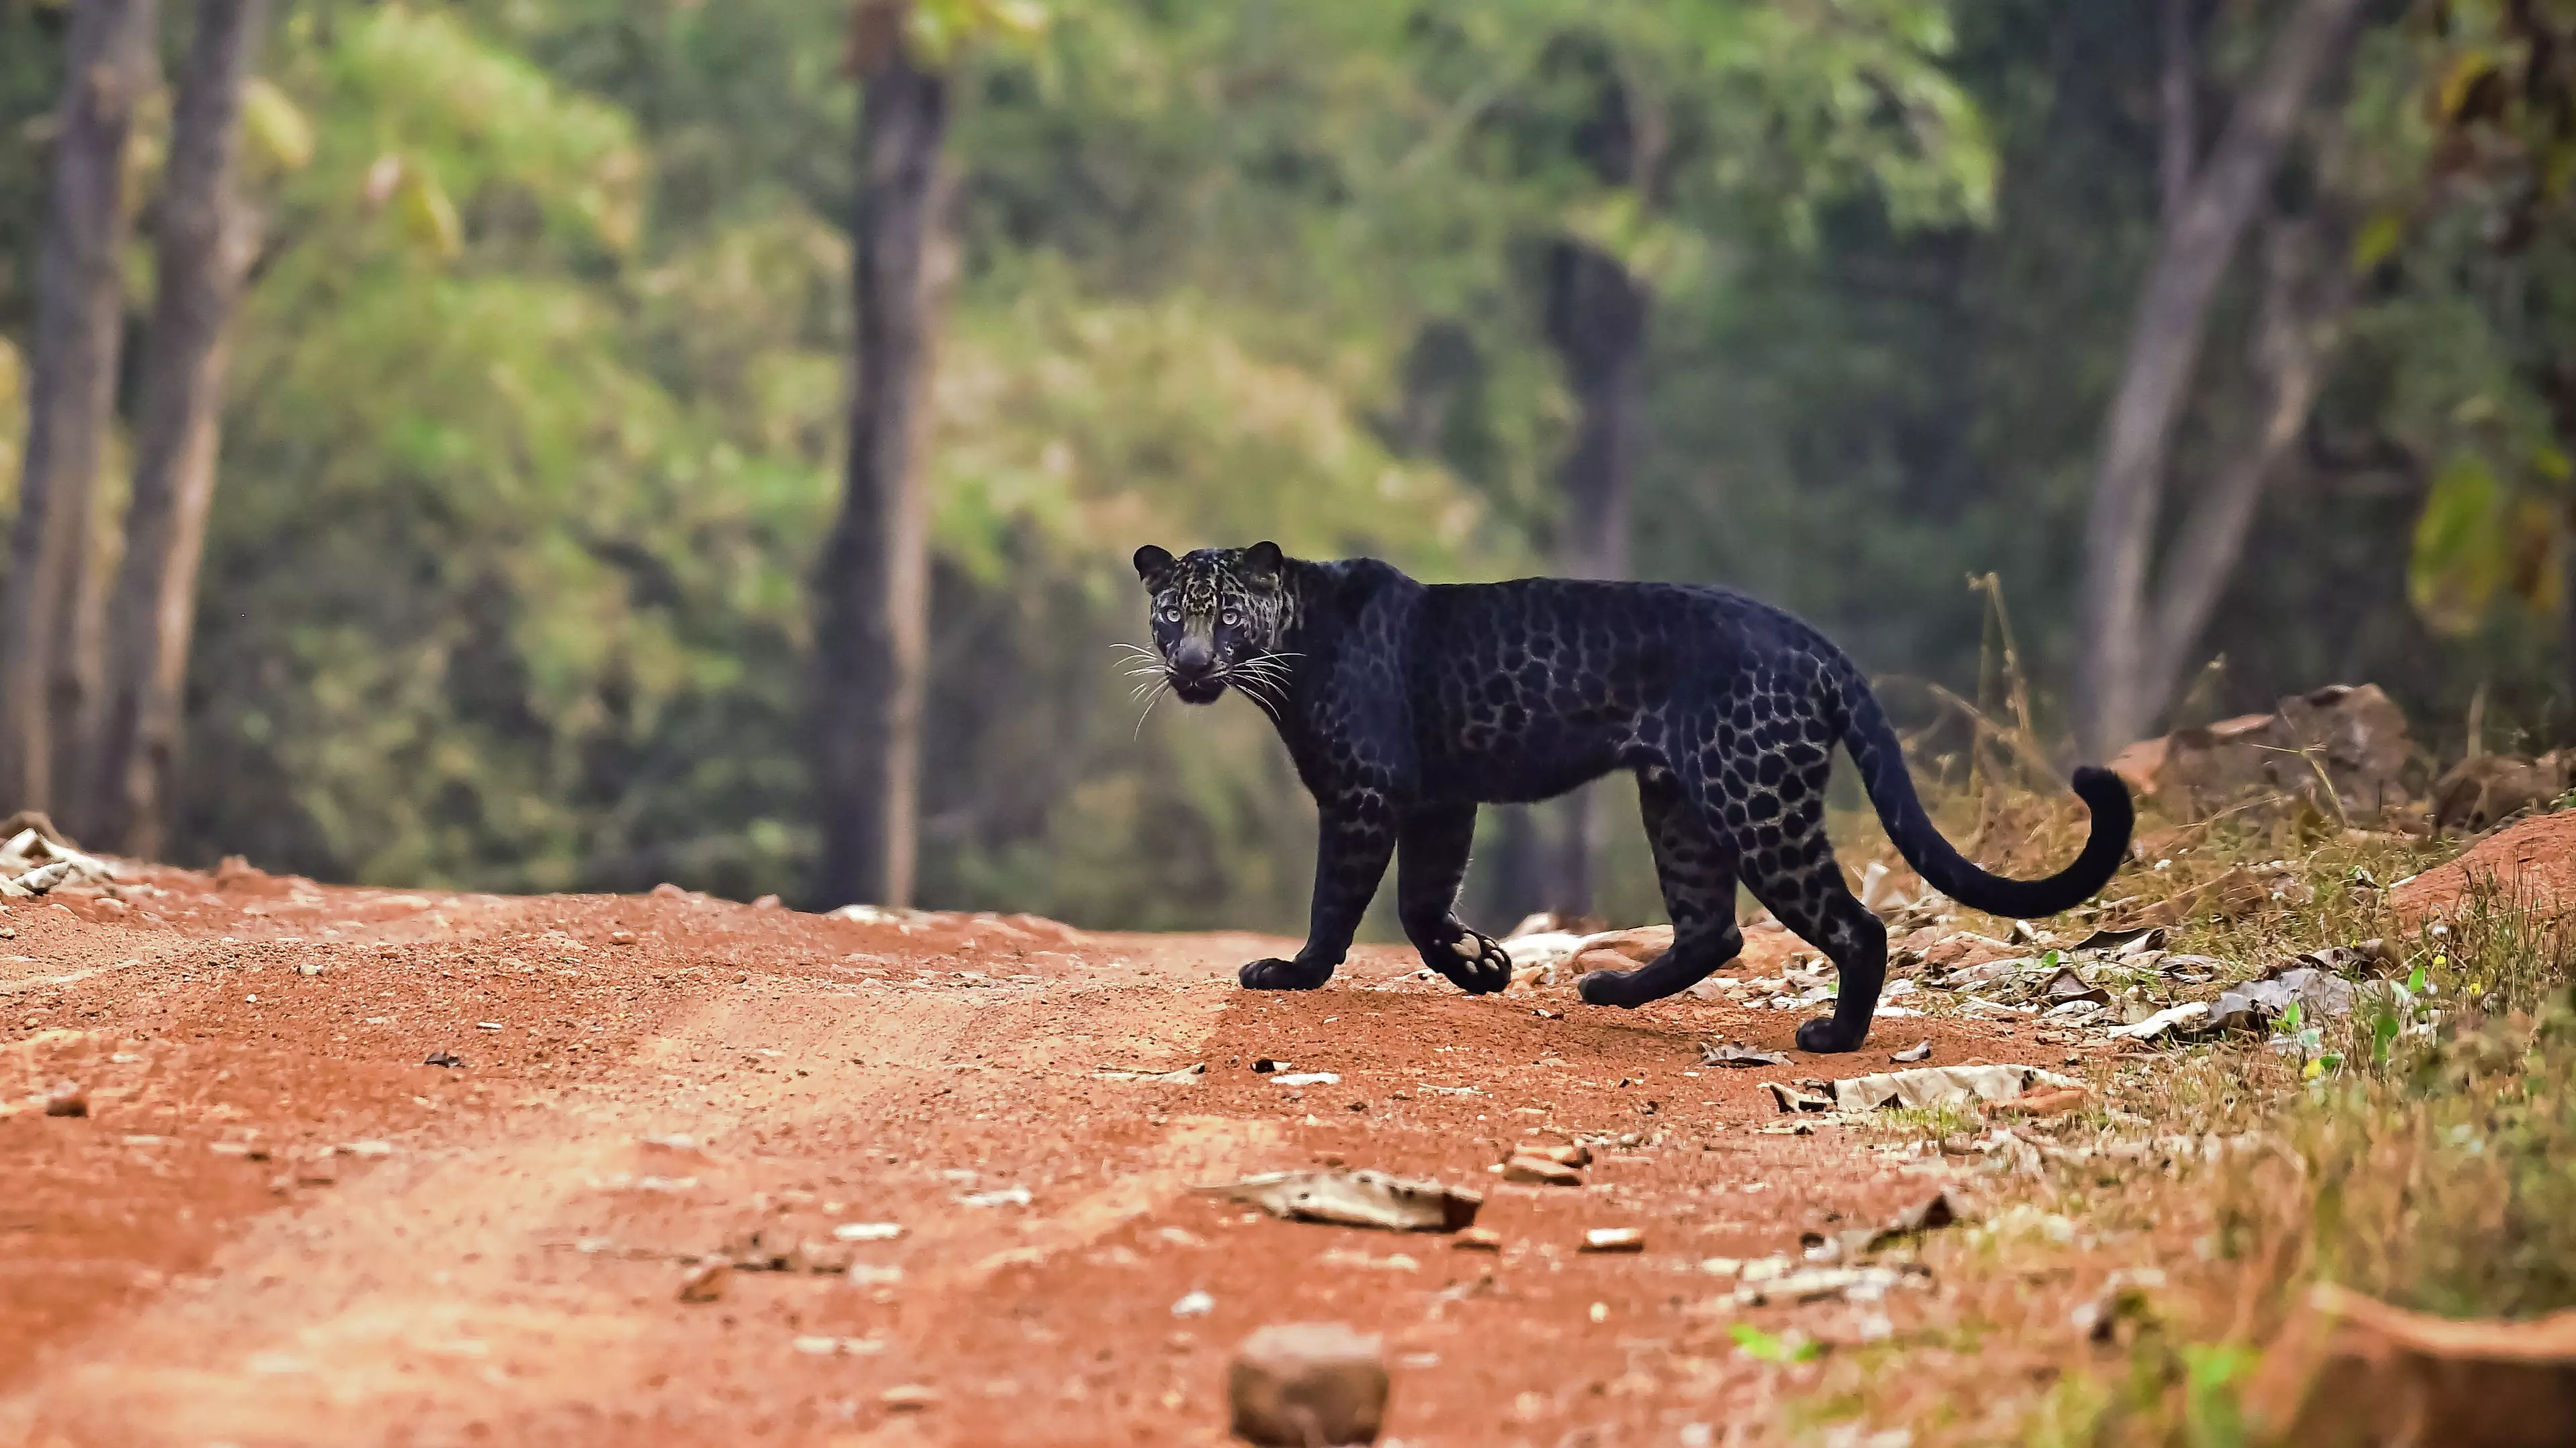 Rare Black Leopard Is Spotted Hunting In Indian National Park 